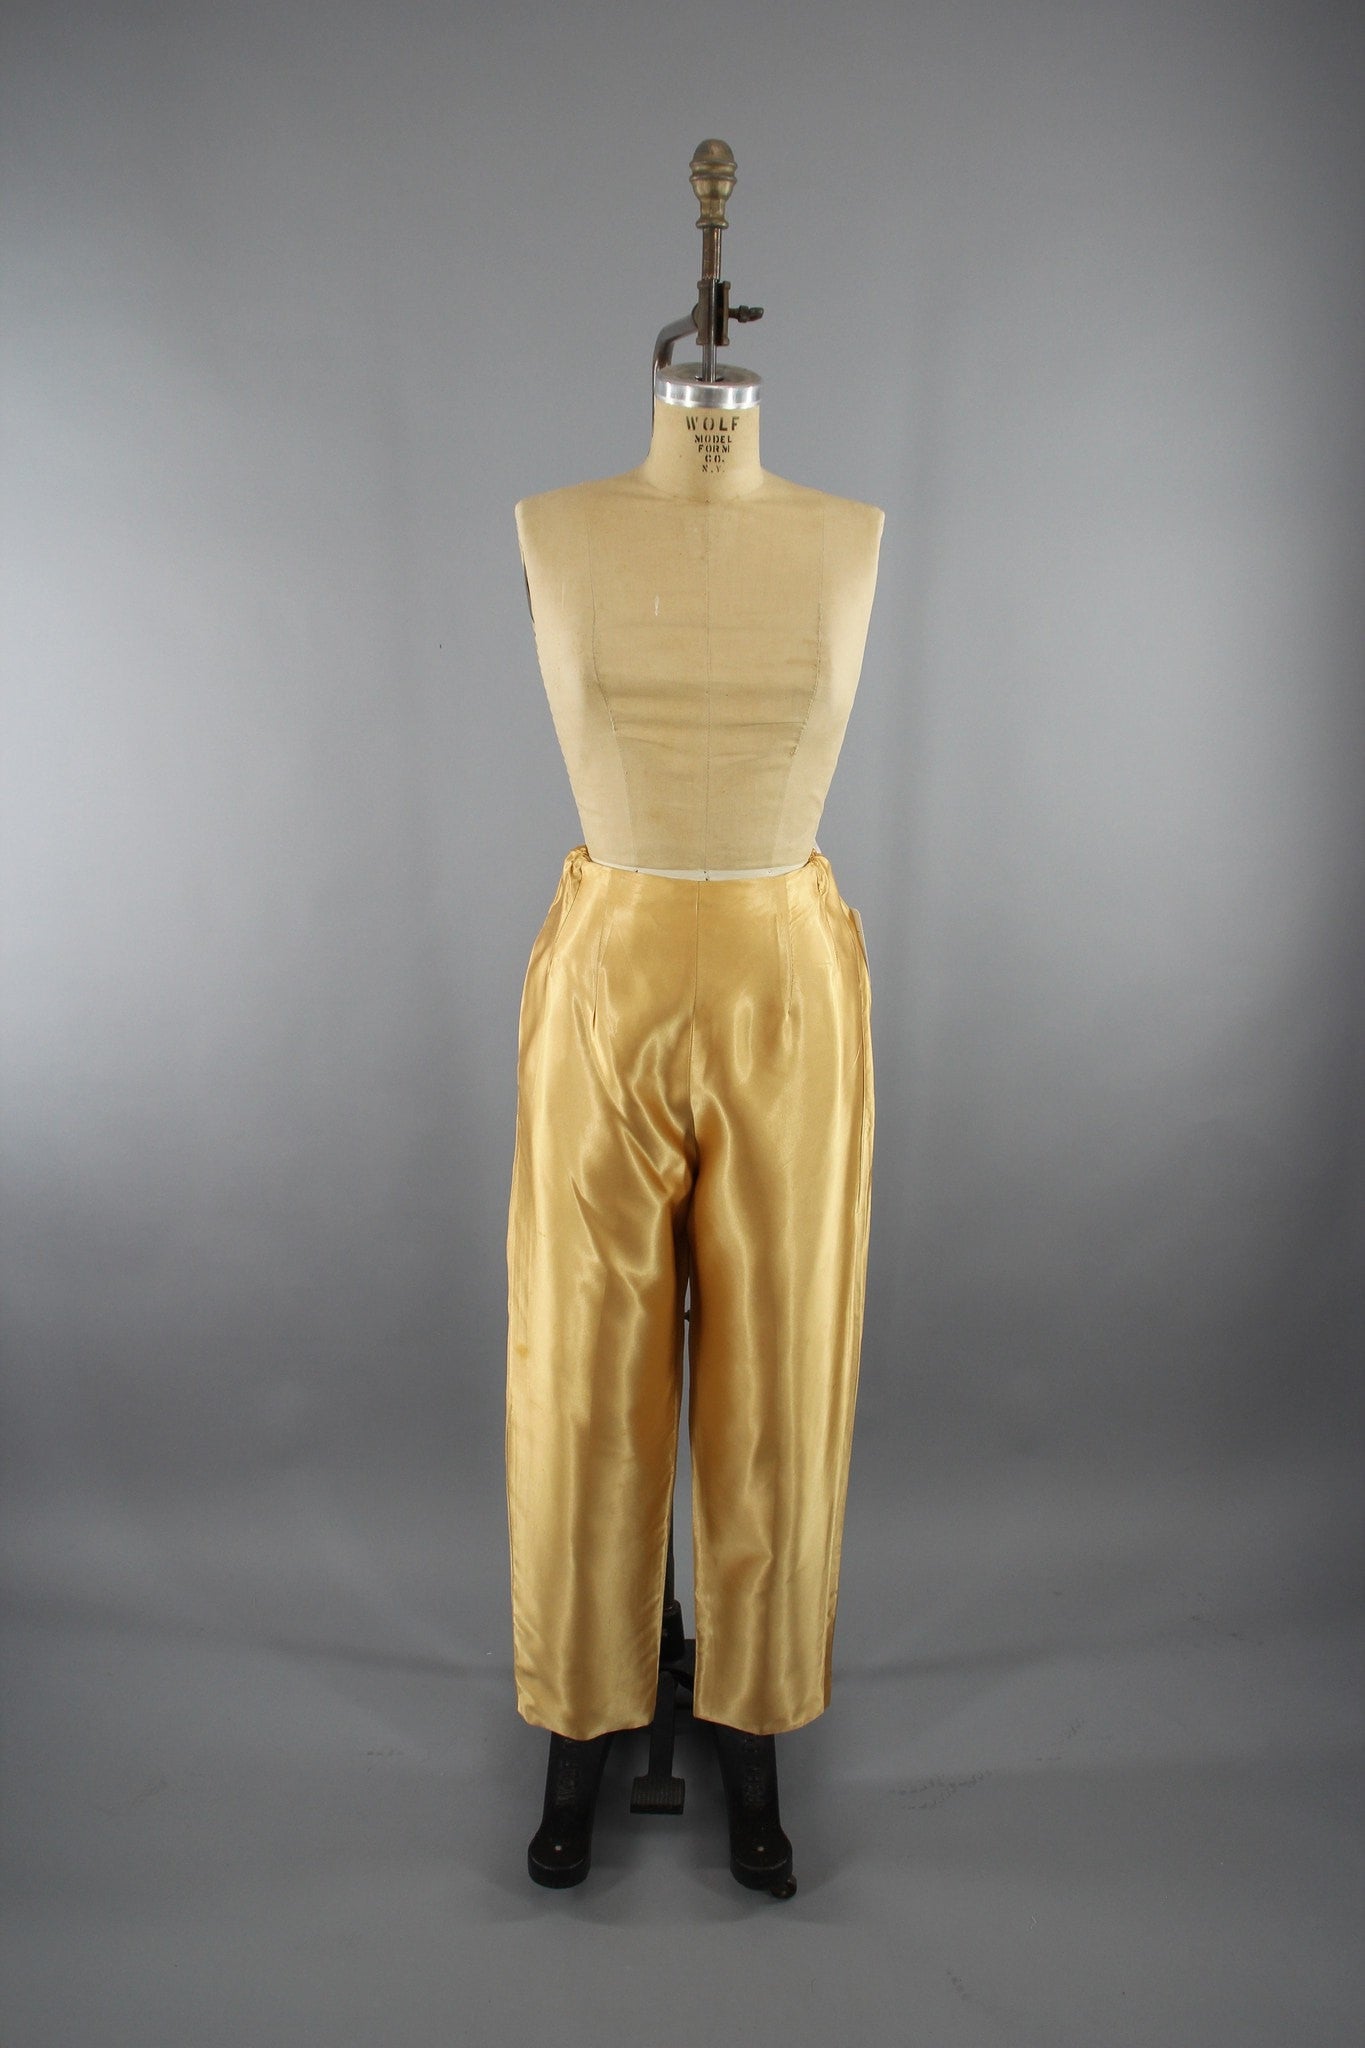 Vintage 1960s Gold Satin Pants / High Waisted Disco Pants - ThisBlueBird